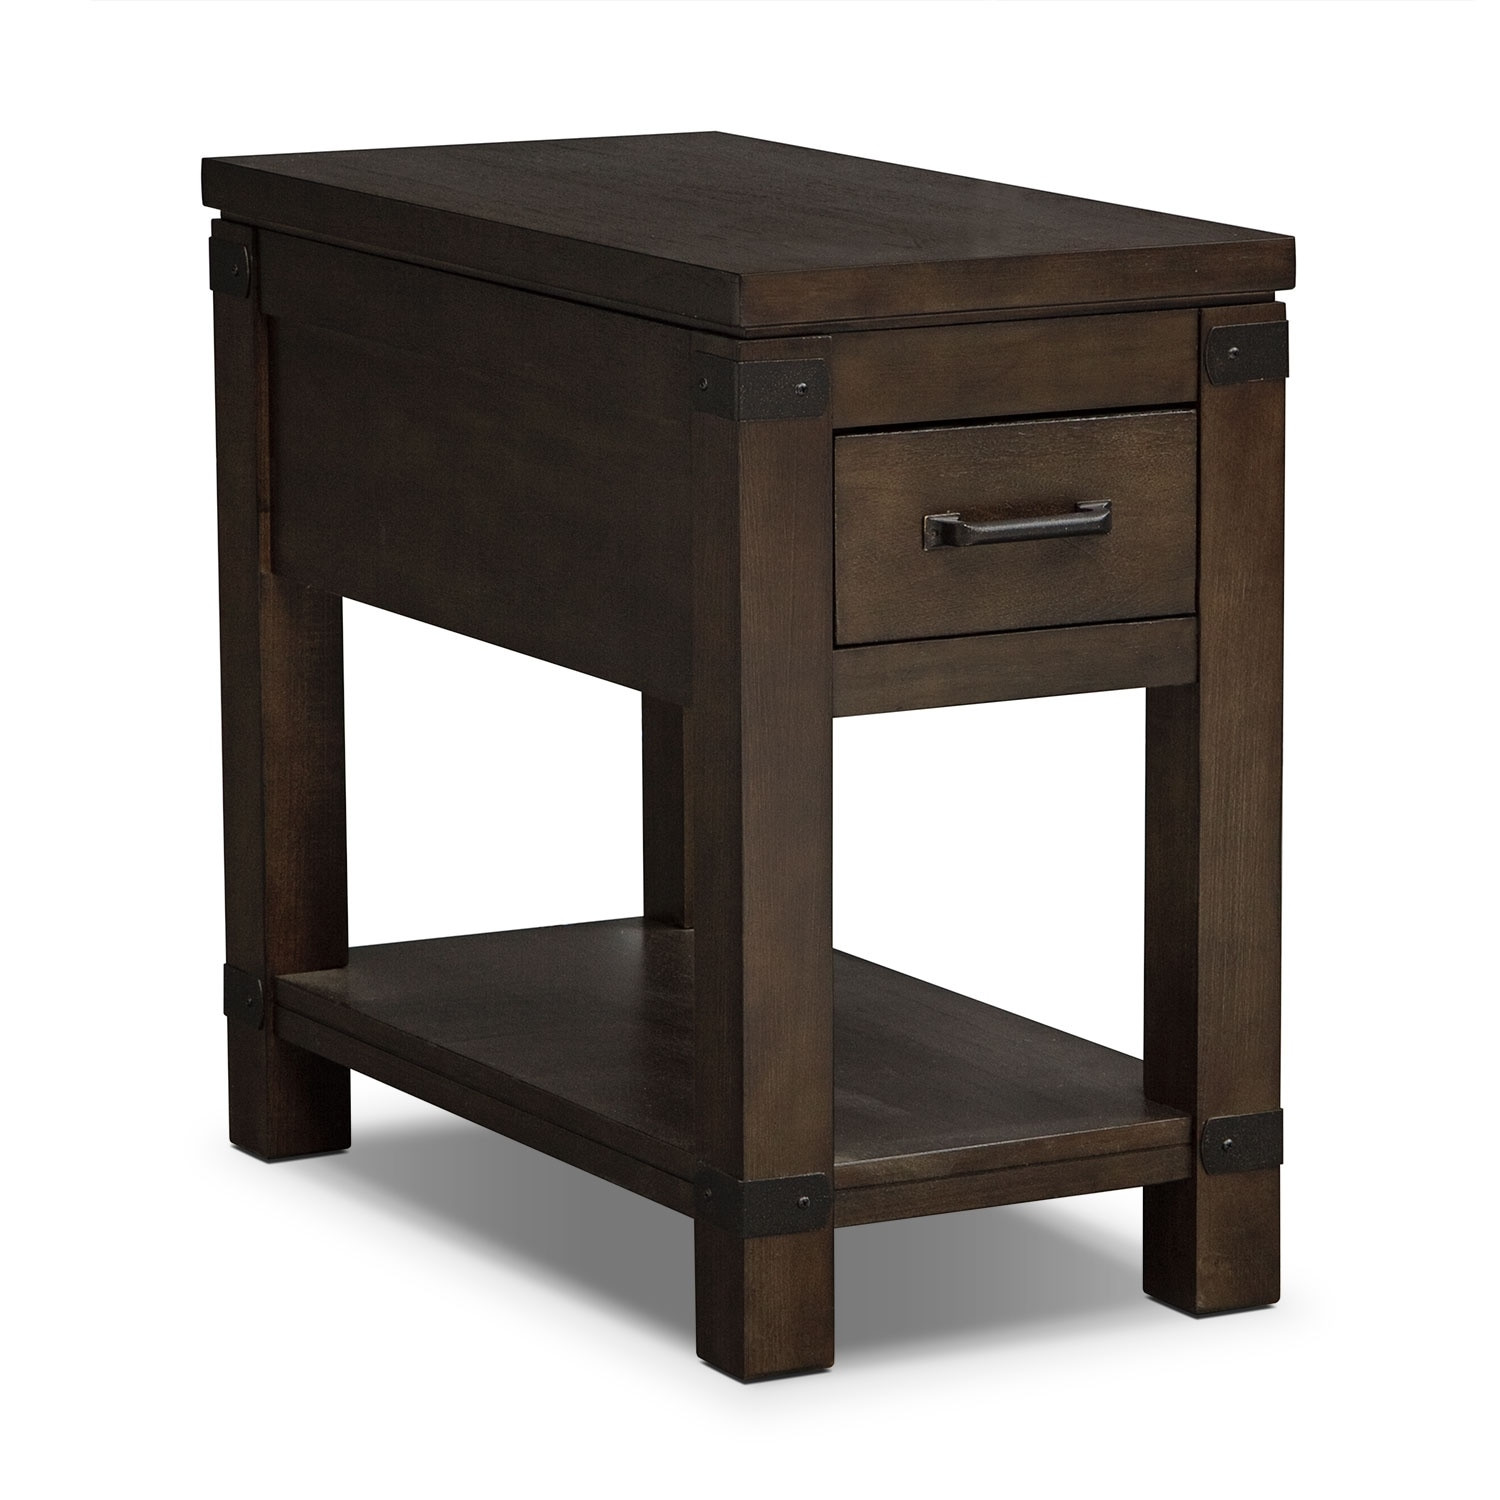 Accent Tables For Living Room
 Camryn Chairside Table Warm Cocoa